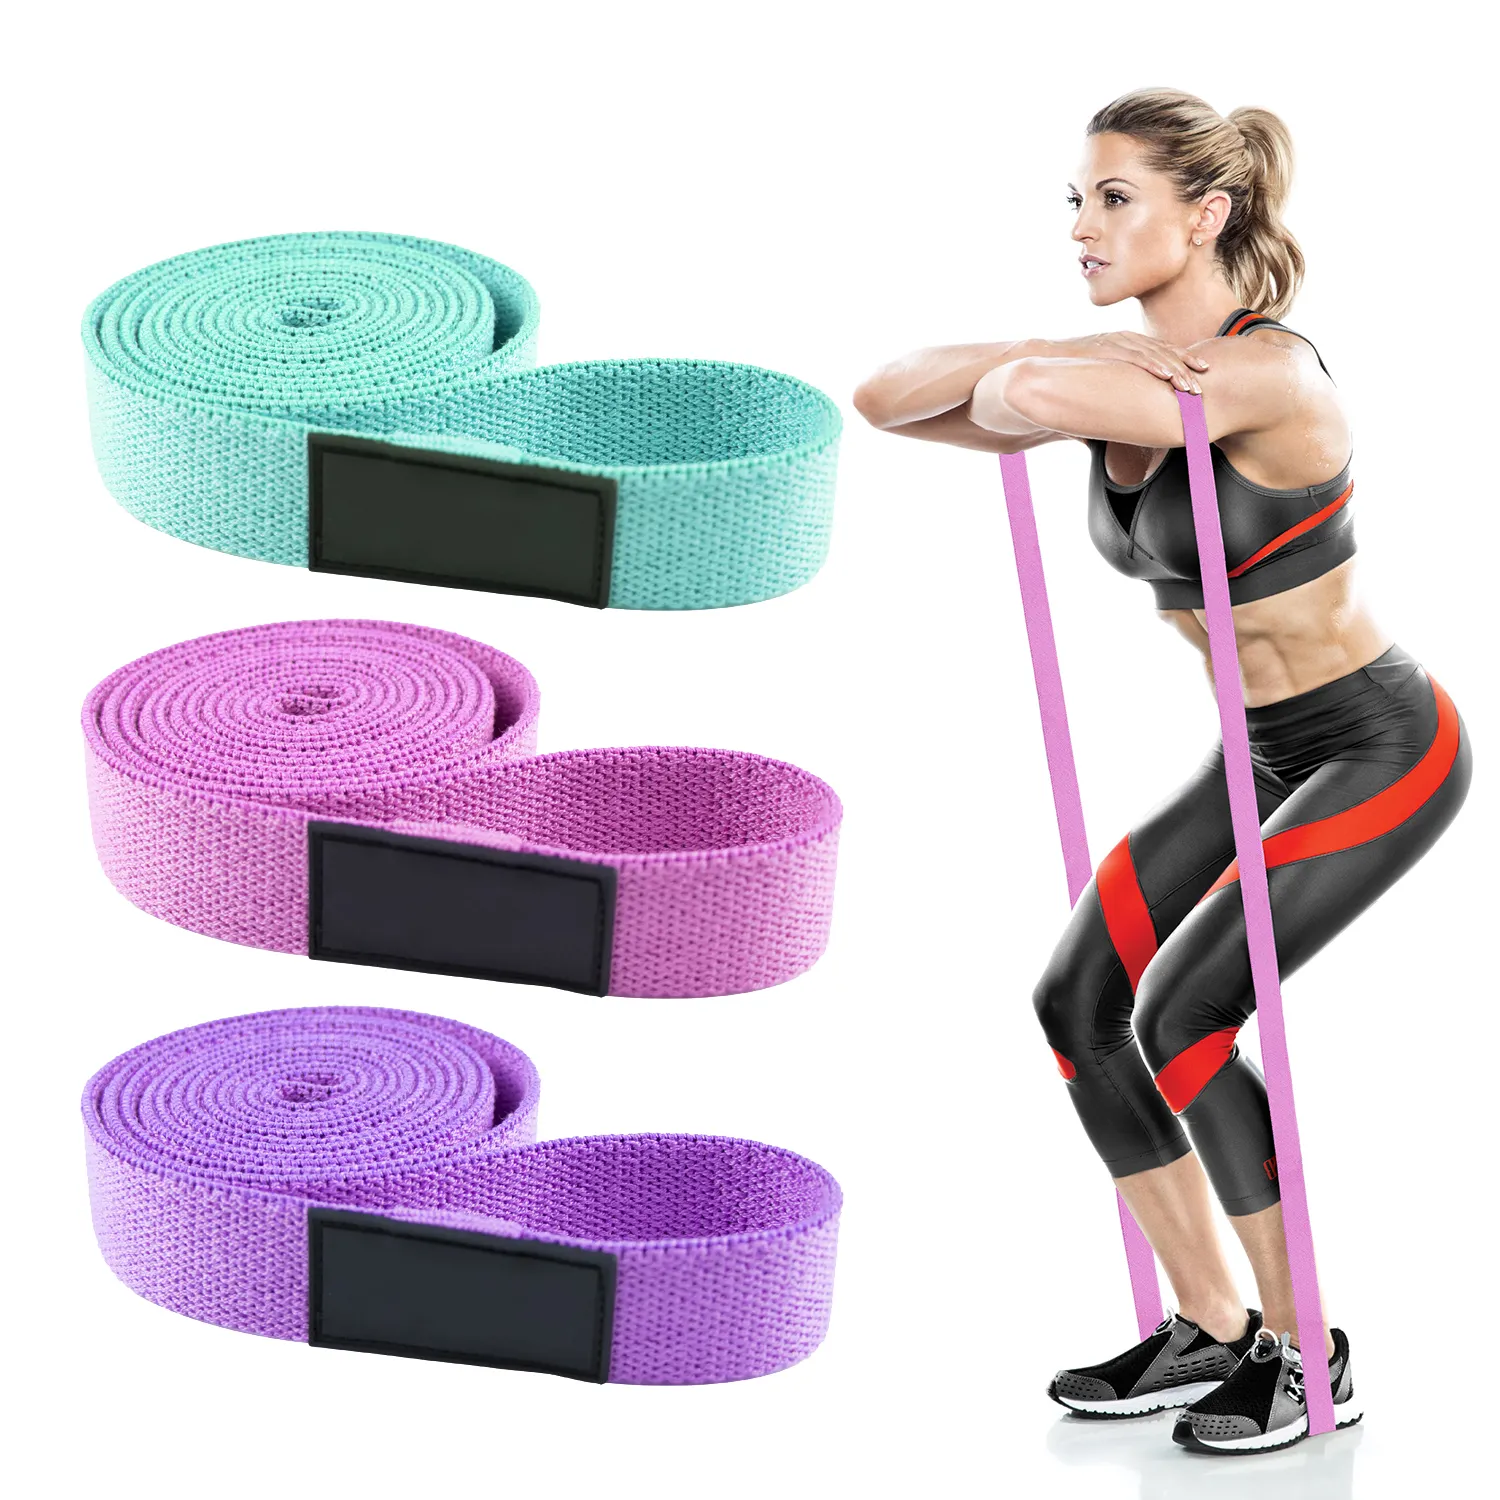 New Custom Logo Yoga Gym Exercise Pull Up Assist Cotton Fabric Long Resistance Bands